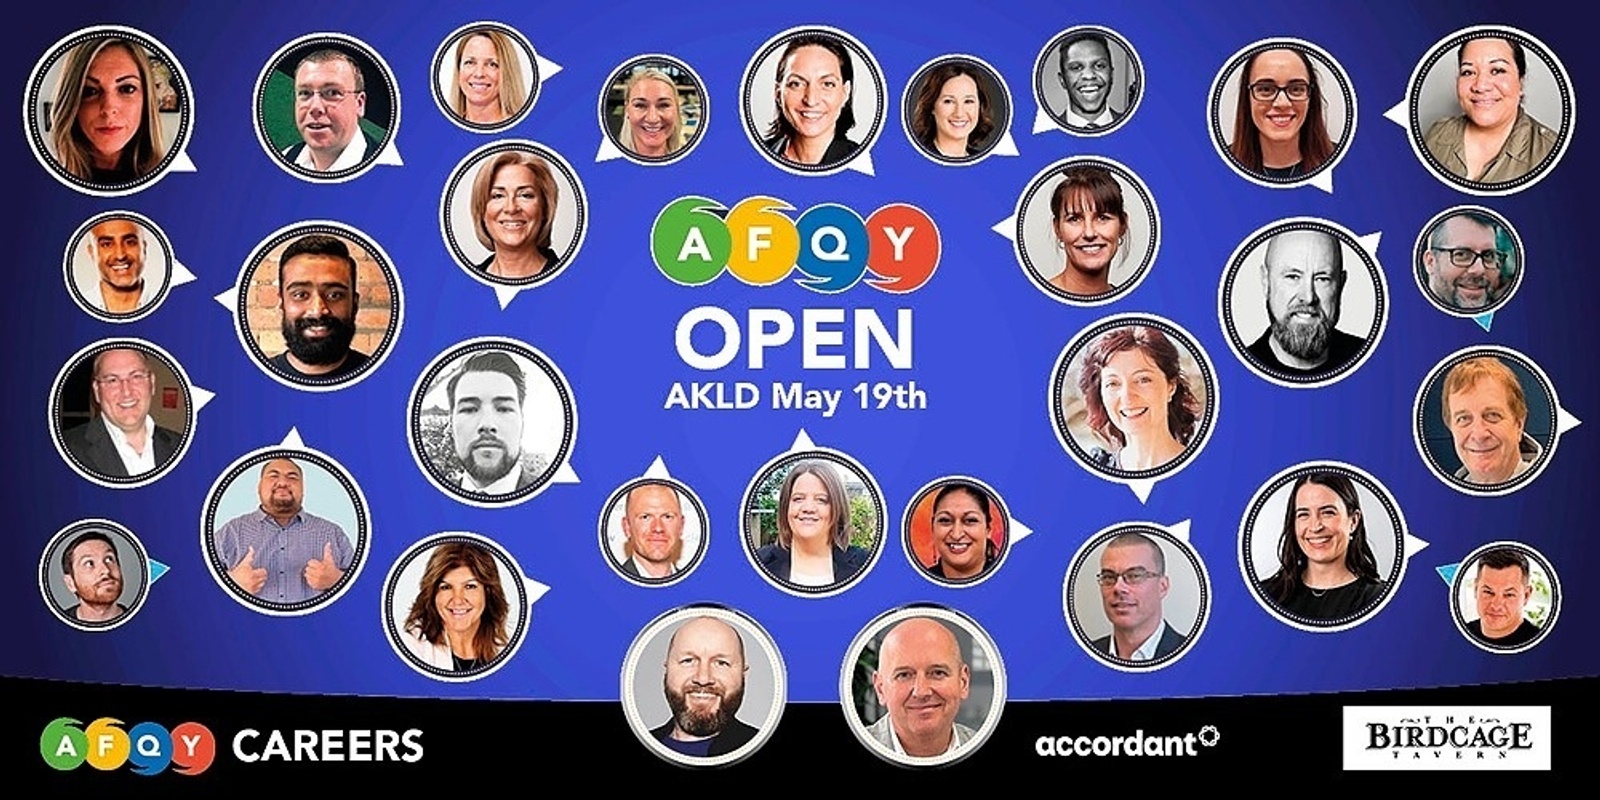 Banner image for AFQY Auckland May 19th 5.30 to 7.30pm